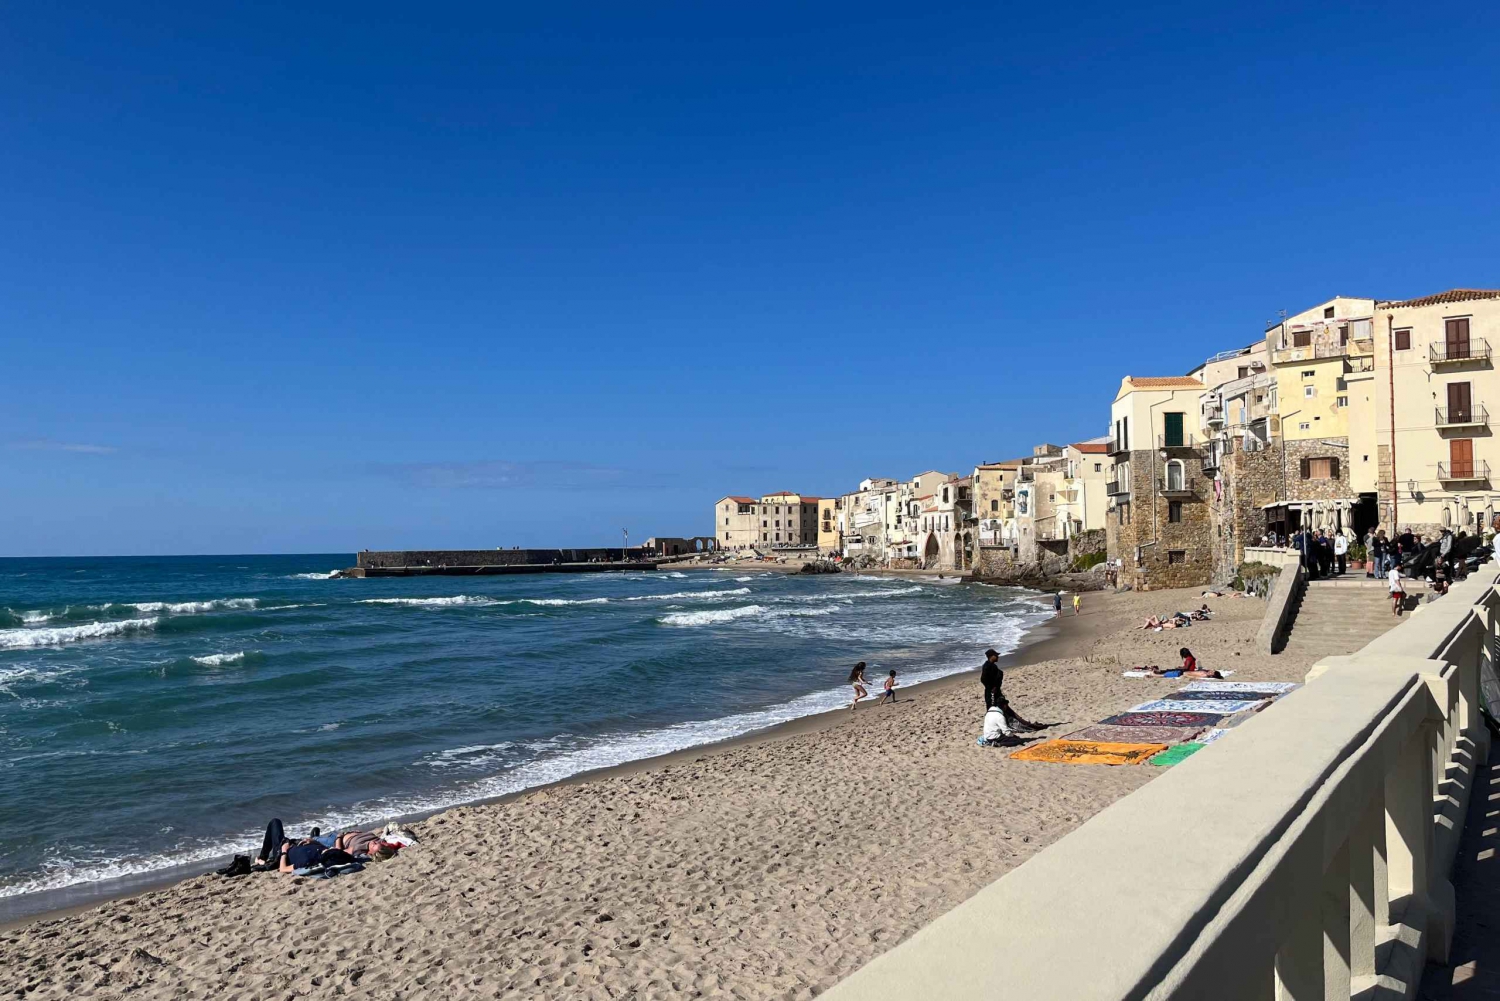 Sicily : audioguide of Cefalu, fisherman town near Palermo